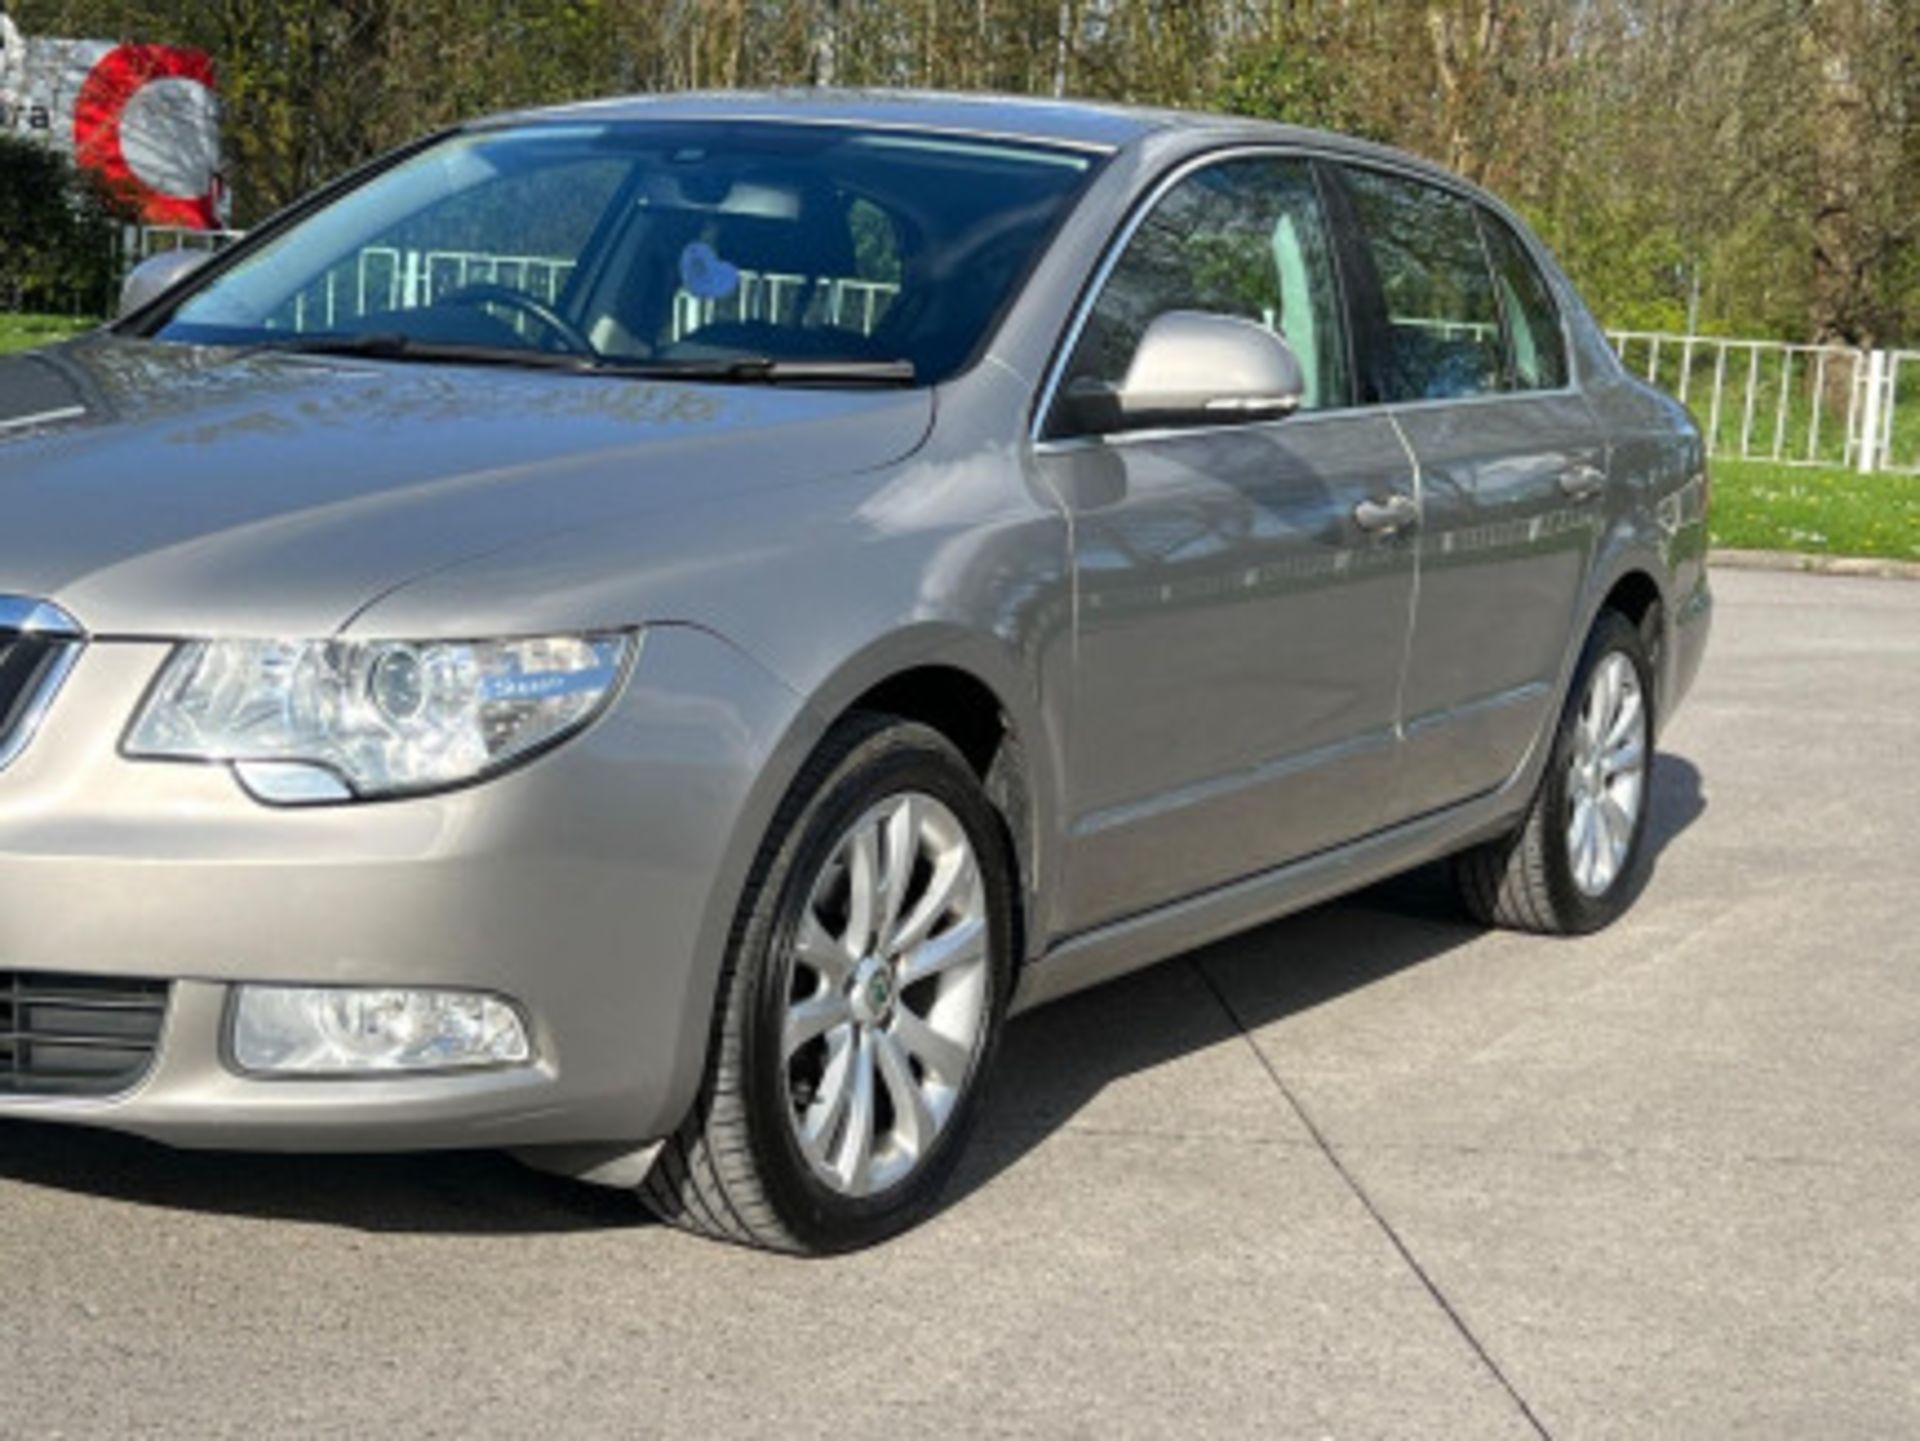 >>--NO VAT ON HAMMER--<<STYLISH AND RELIABLE SKODA SUPERB 1.6 TDI S GREENLINE II EURO 5 - Image 40 of 141